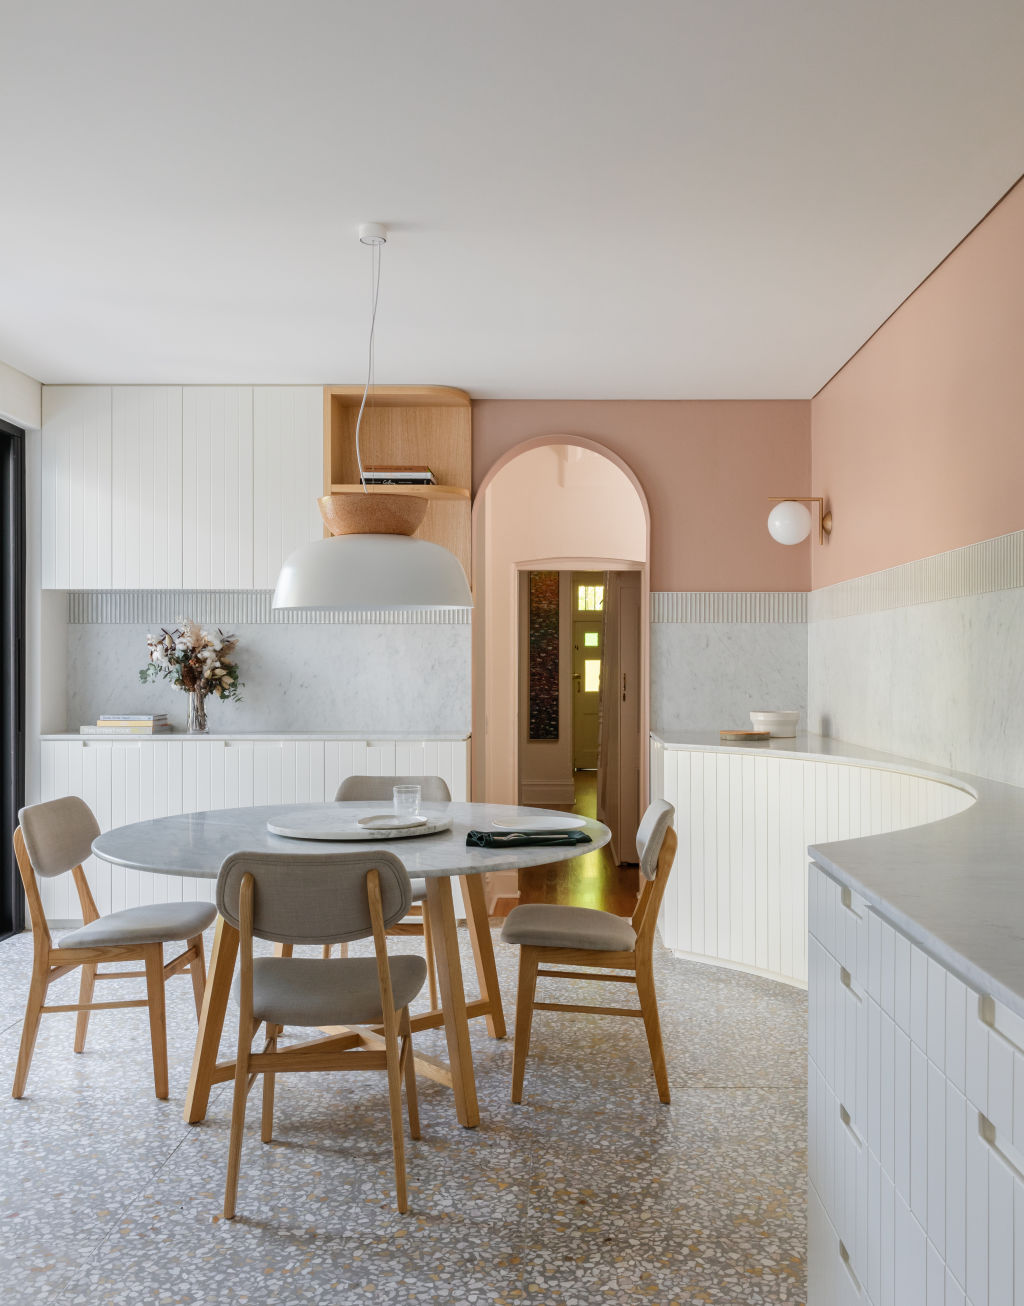 This kitchen has been designed to accommodate a beloved dining table. Photo: Katherine Lu